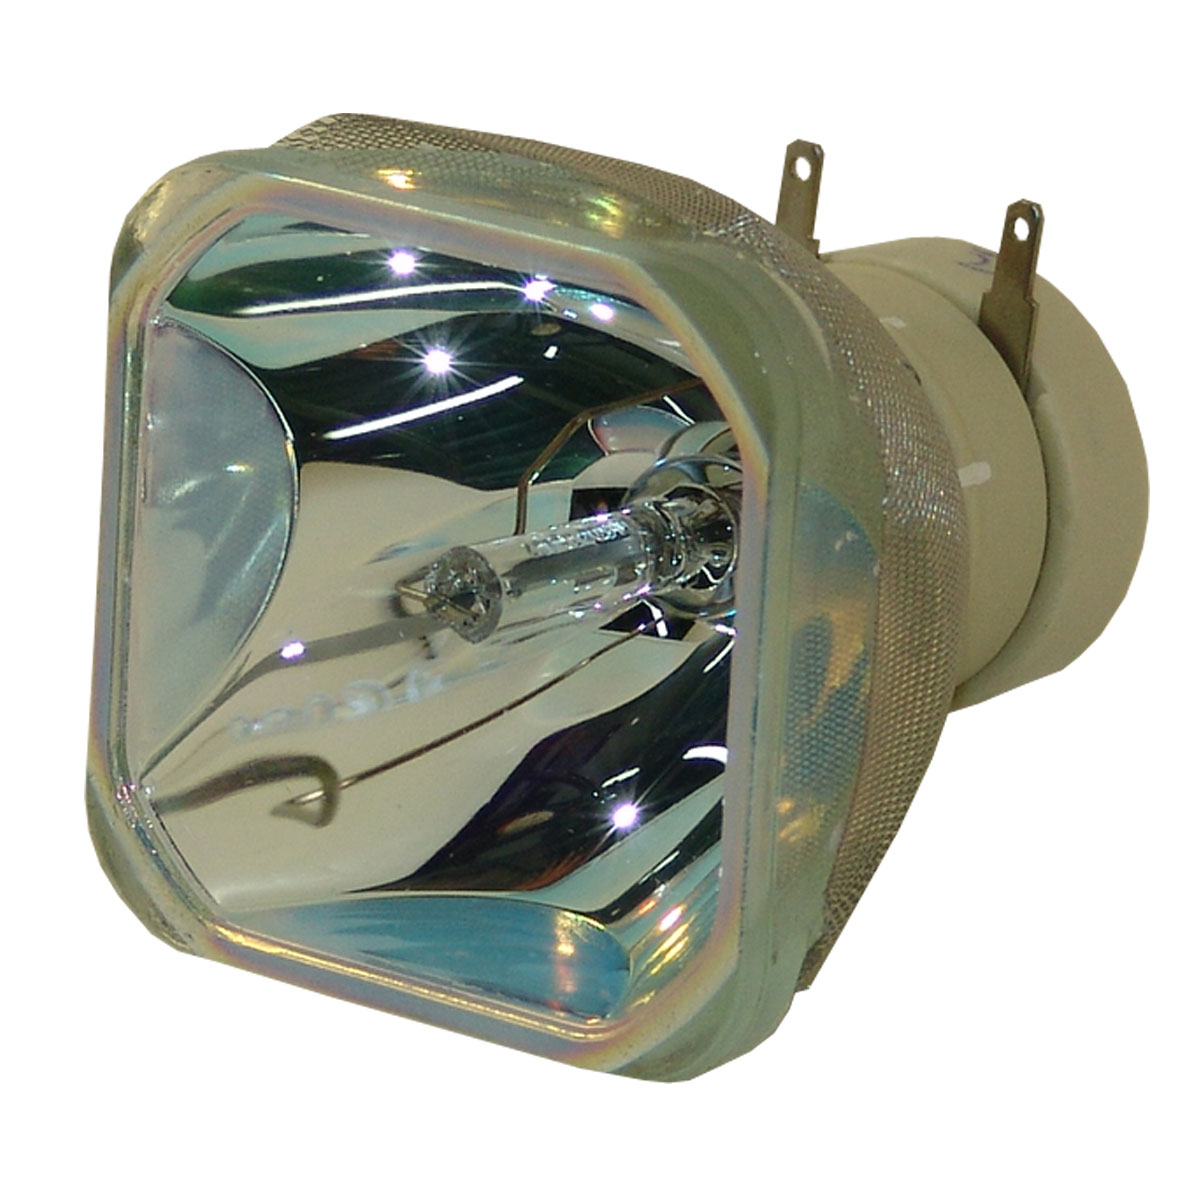 Original Philips Projector Lamp Replacement for Hitachi DT01241 (Bulb Only) - image 1 of 6